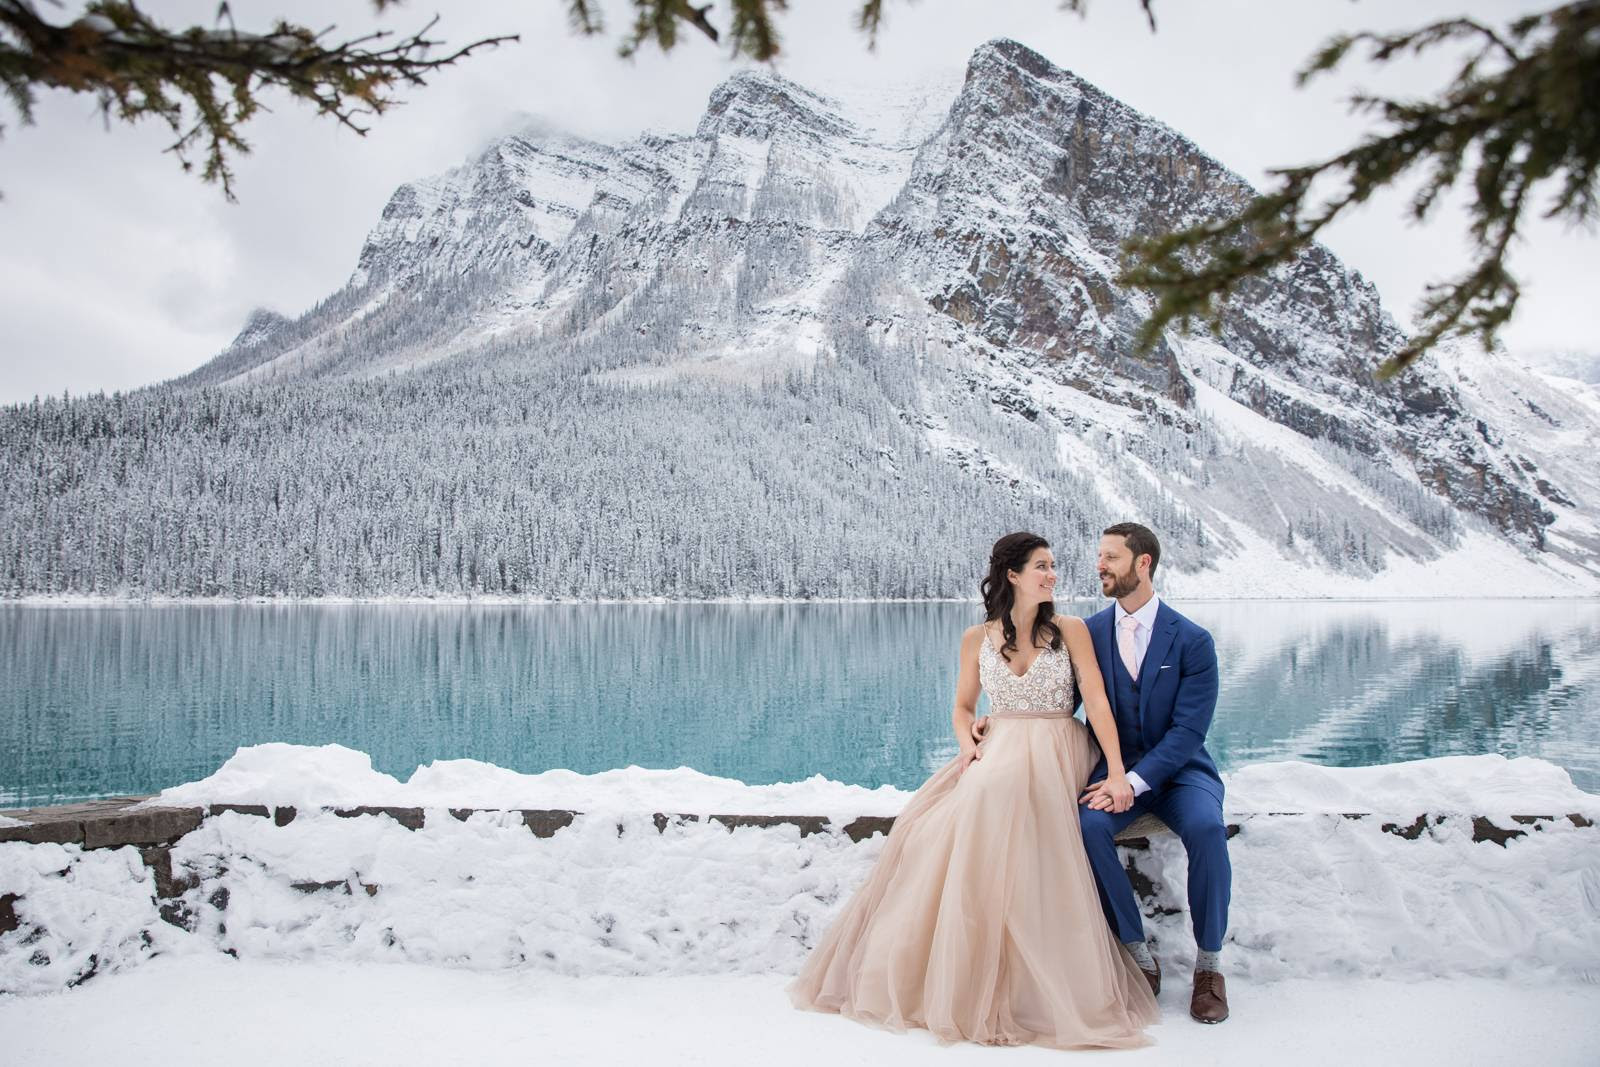 Our goal is always to provide you with a wonderful experience. Lake Louise Winter Wonderland Wedding Lake Louise Wedding Photographer Lake Louise